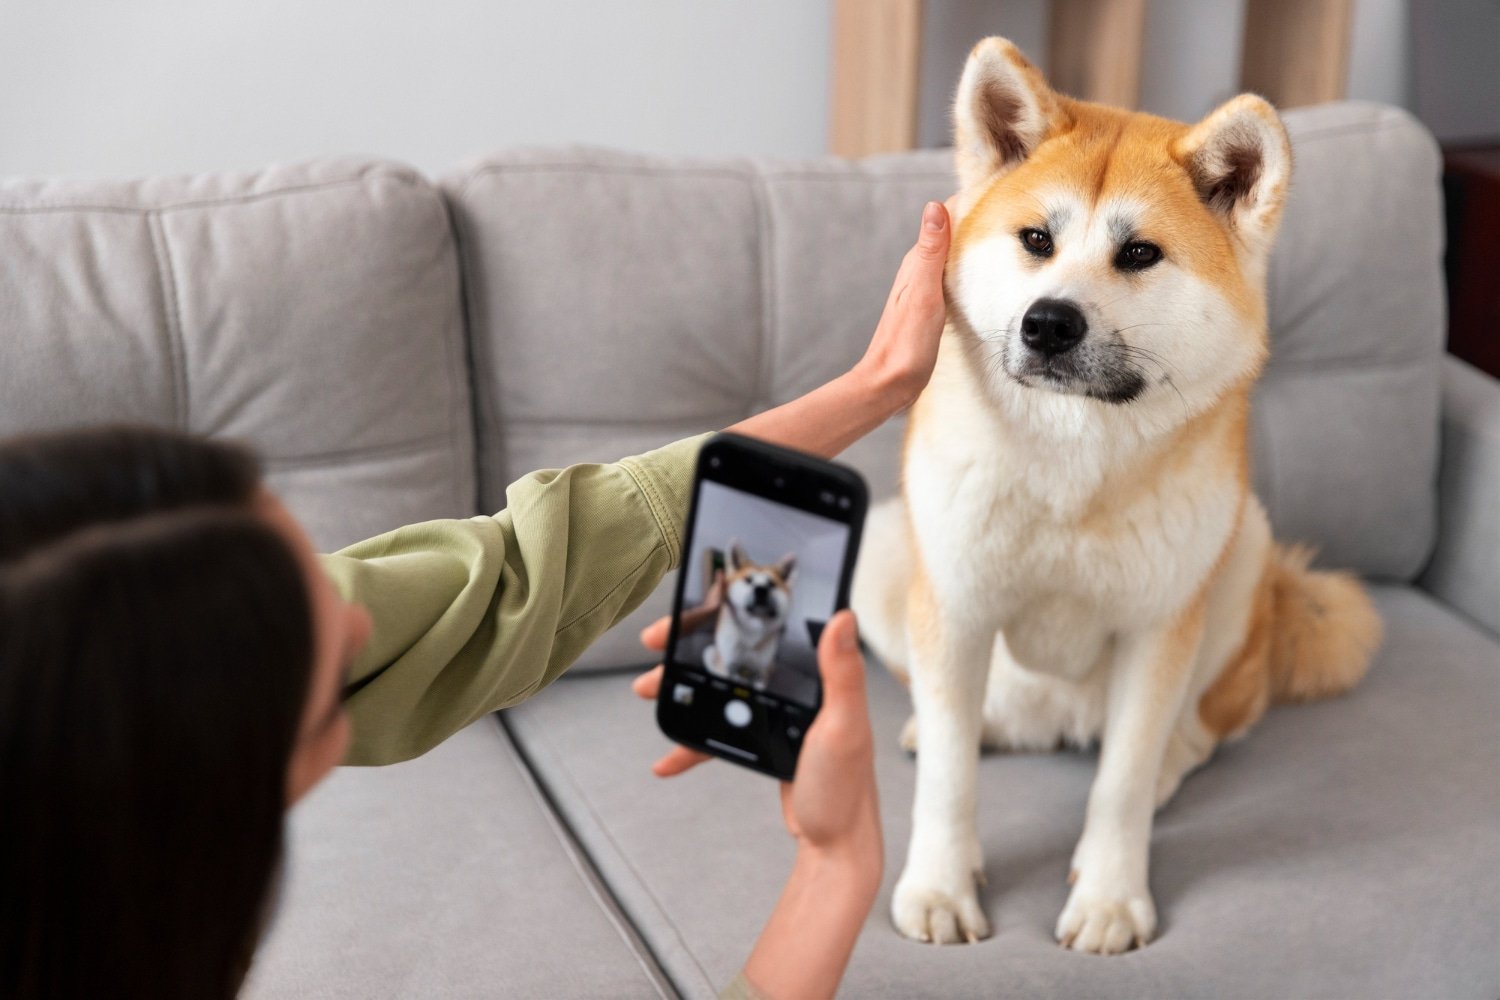 Keeping Pets Safe with SpotOn Virtual Fence’s Latest Technology